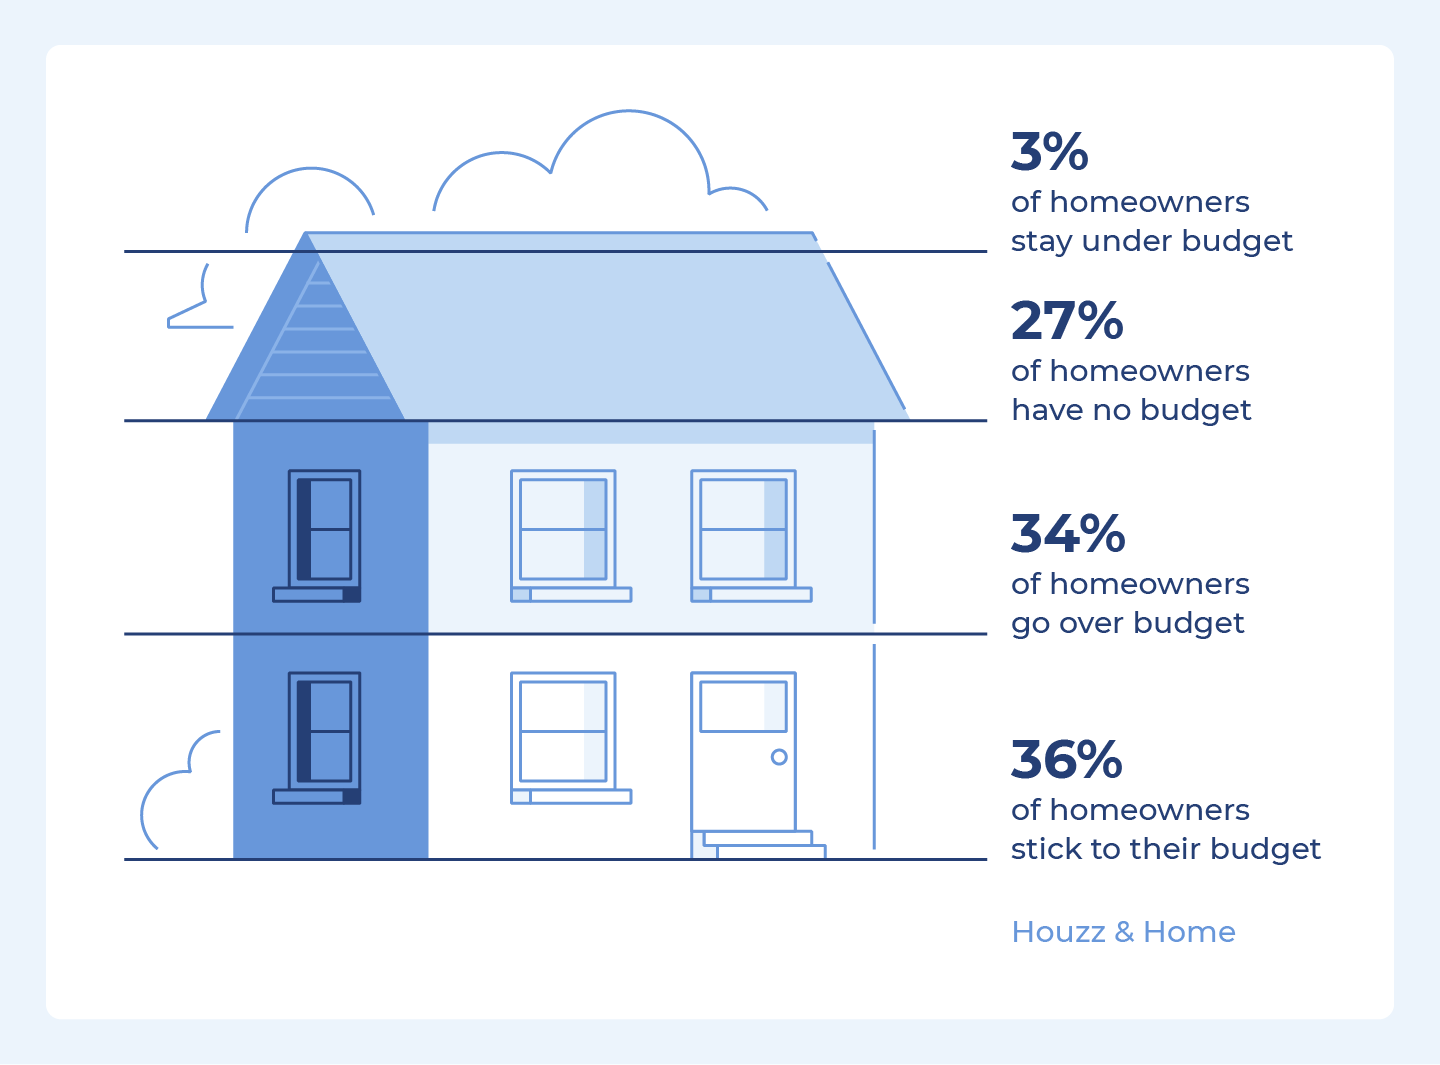 In 2022, 3% of homeowners stay under budget, 27% have no budget, 34% go over budget, and 36% stick to their budget.